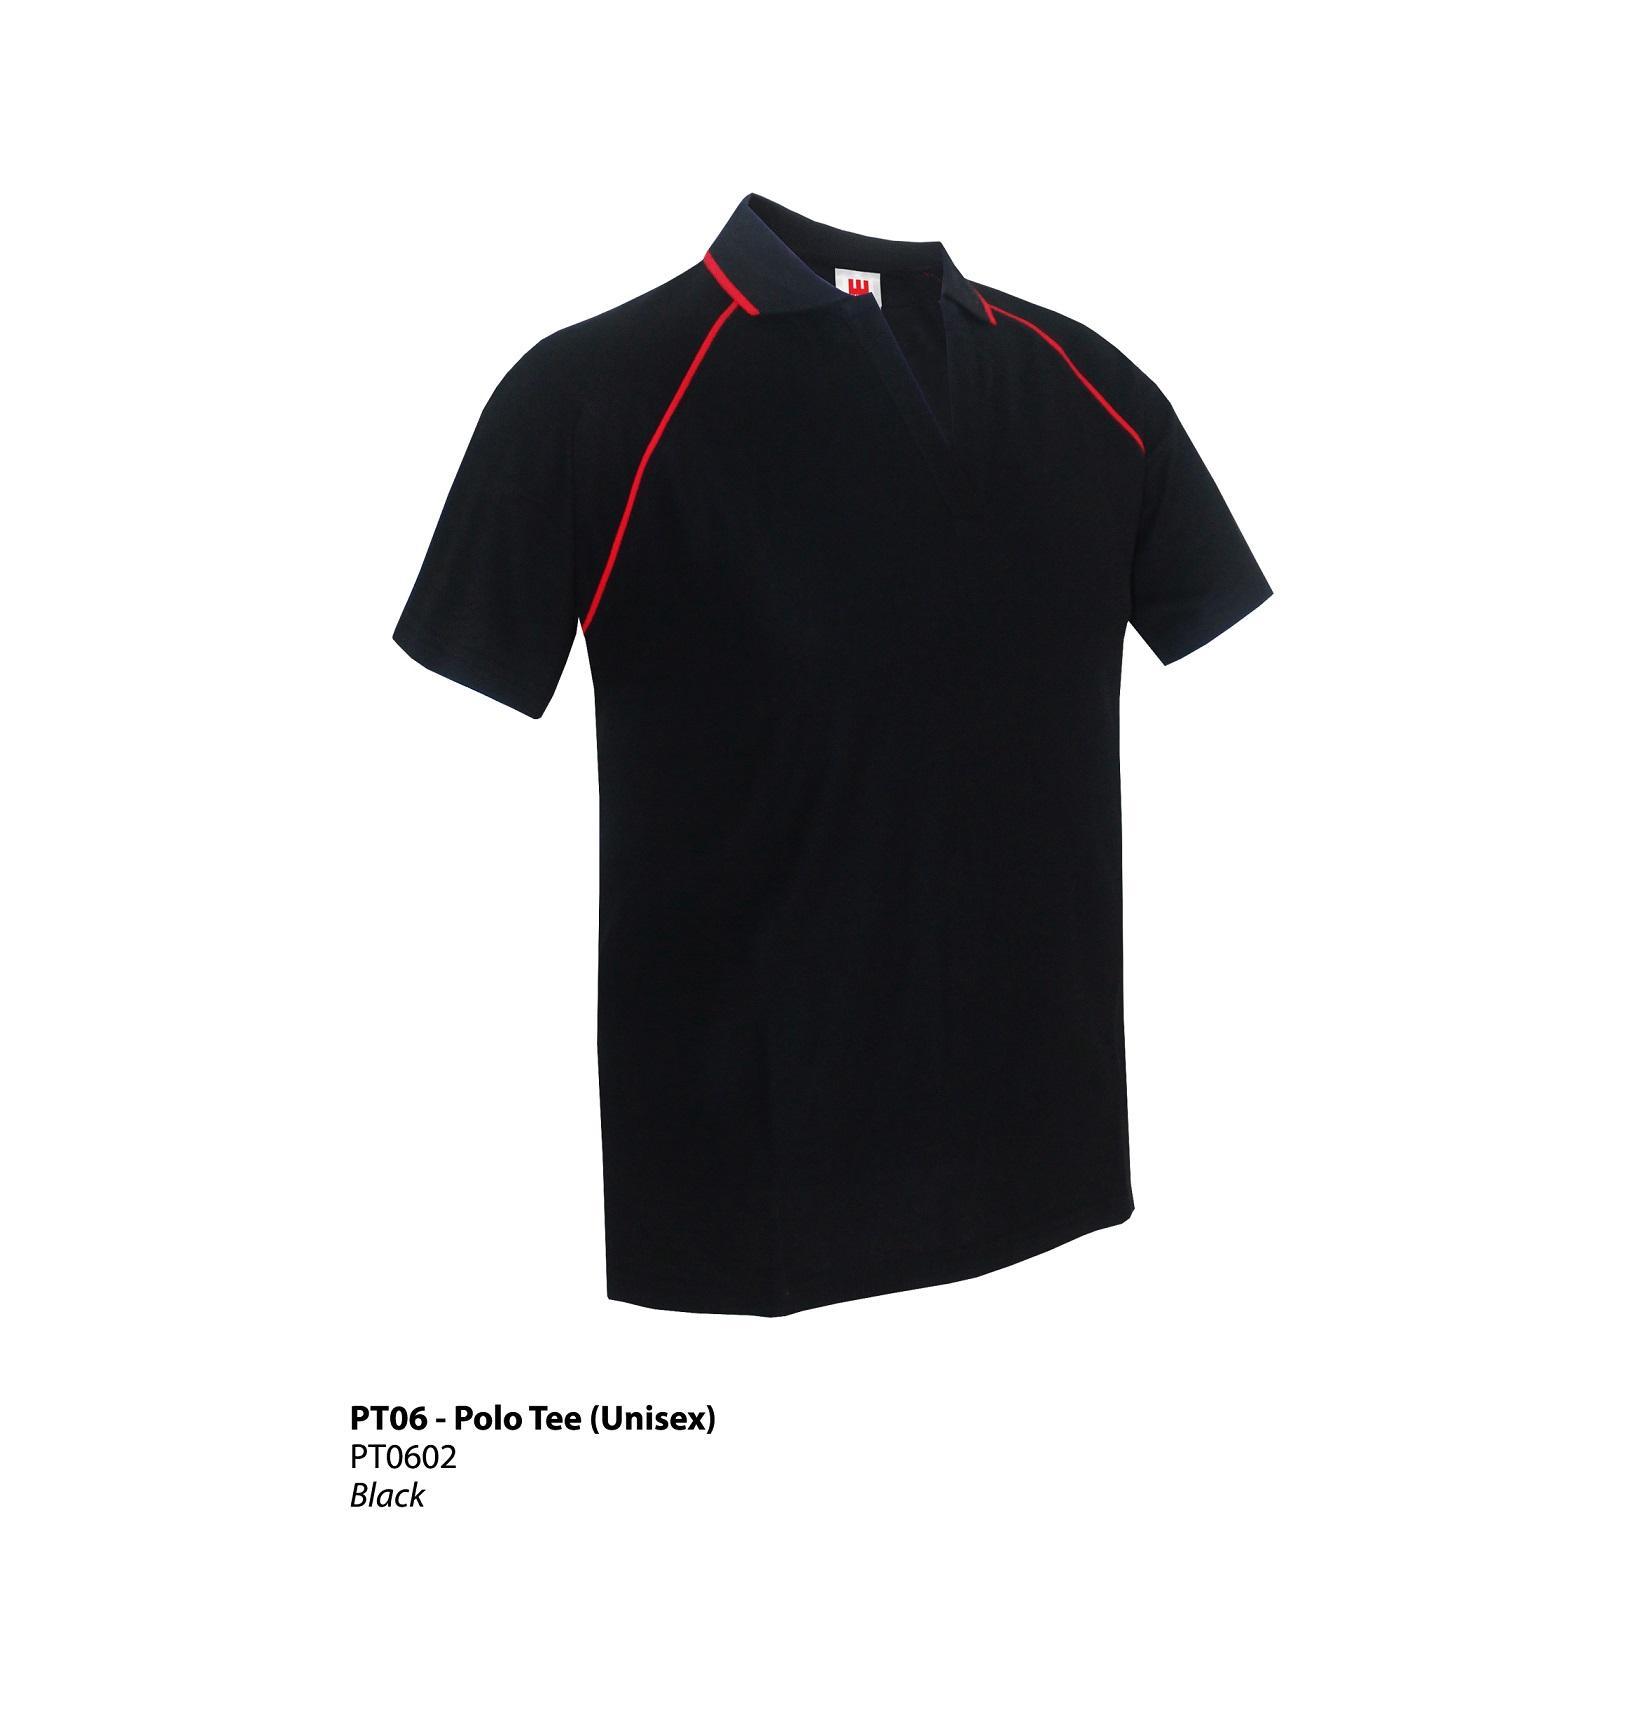 POLO TEE PT06 (V-Neck Tipping Collar) – 6 Colors (Unisex) - T Shirt 2 u /  Online T-Shirts printing, uniform Printing, Embroidery, Silk Screen, DTG  Printing